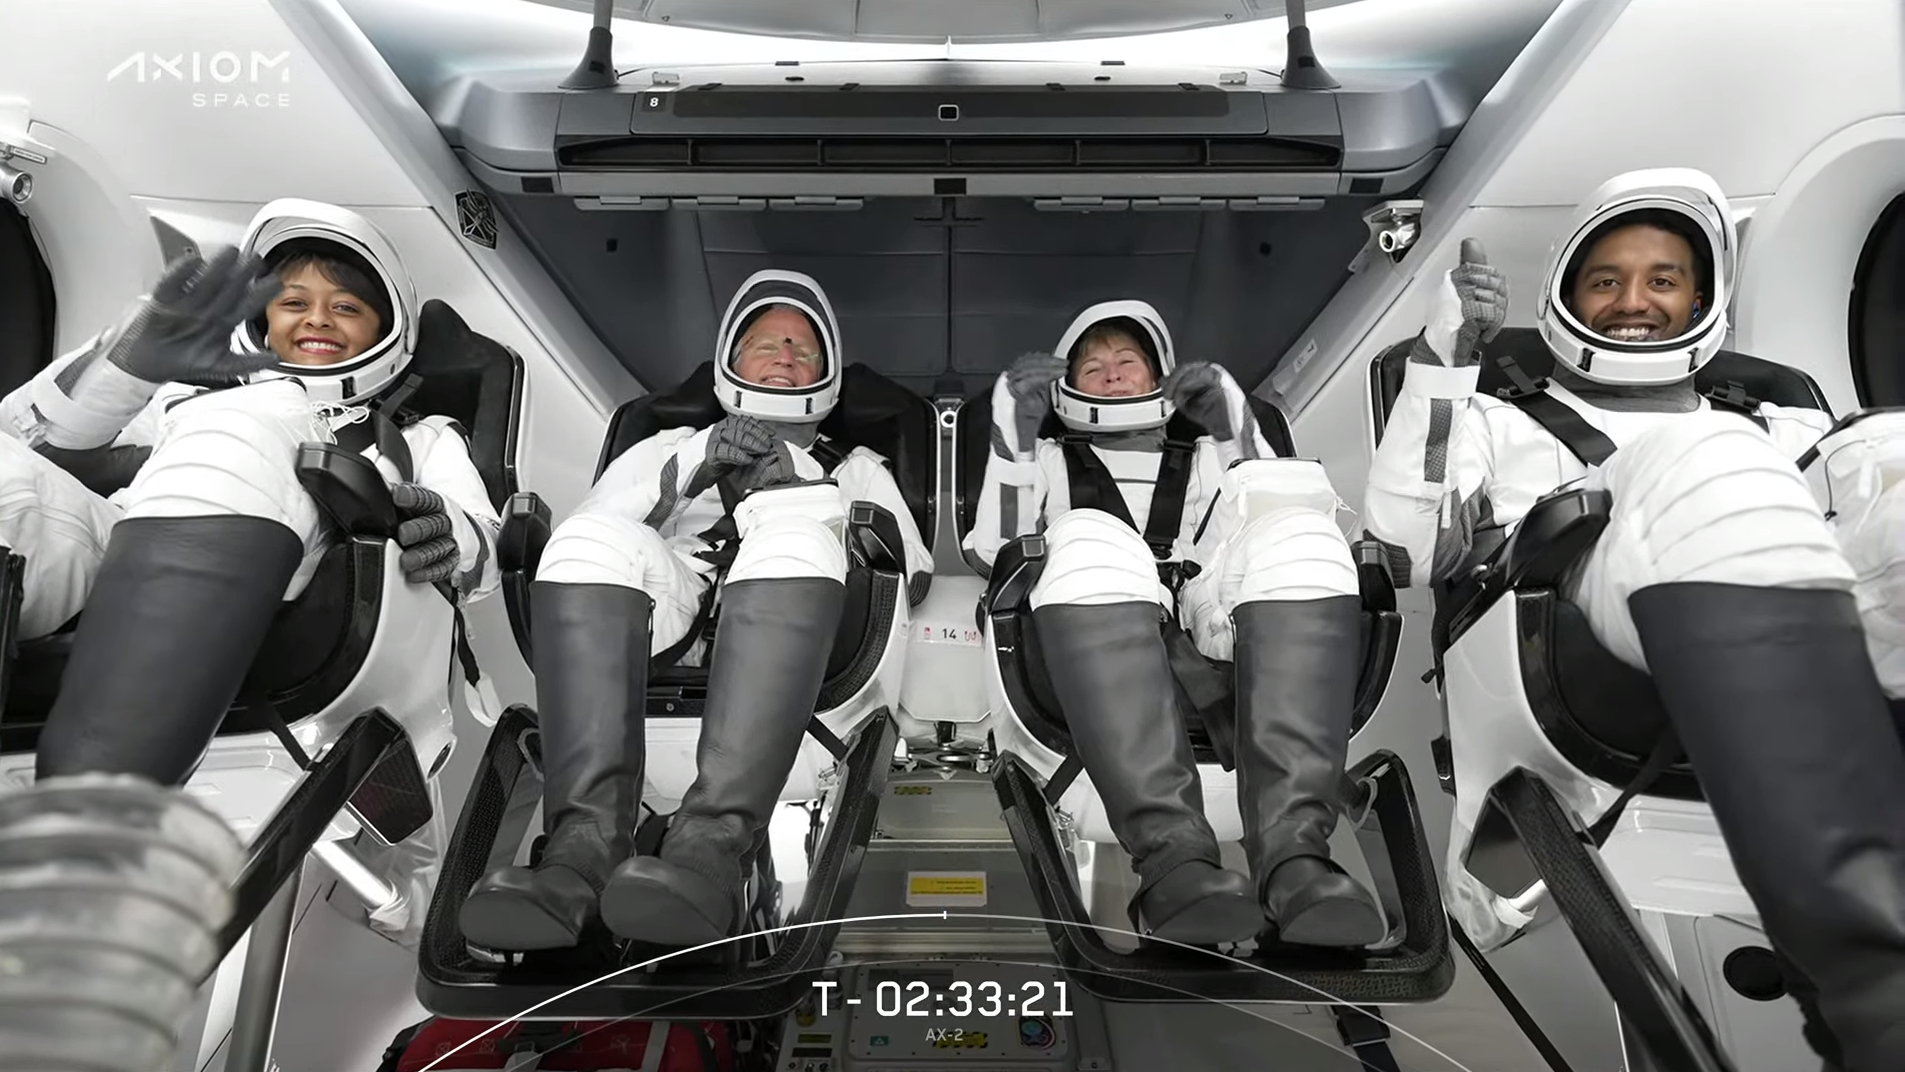 Ax-2 astronauts in spacesuits strapped in inside Dragon capsule Freedom